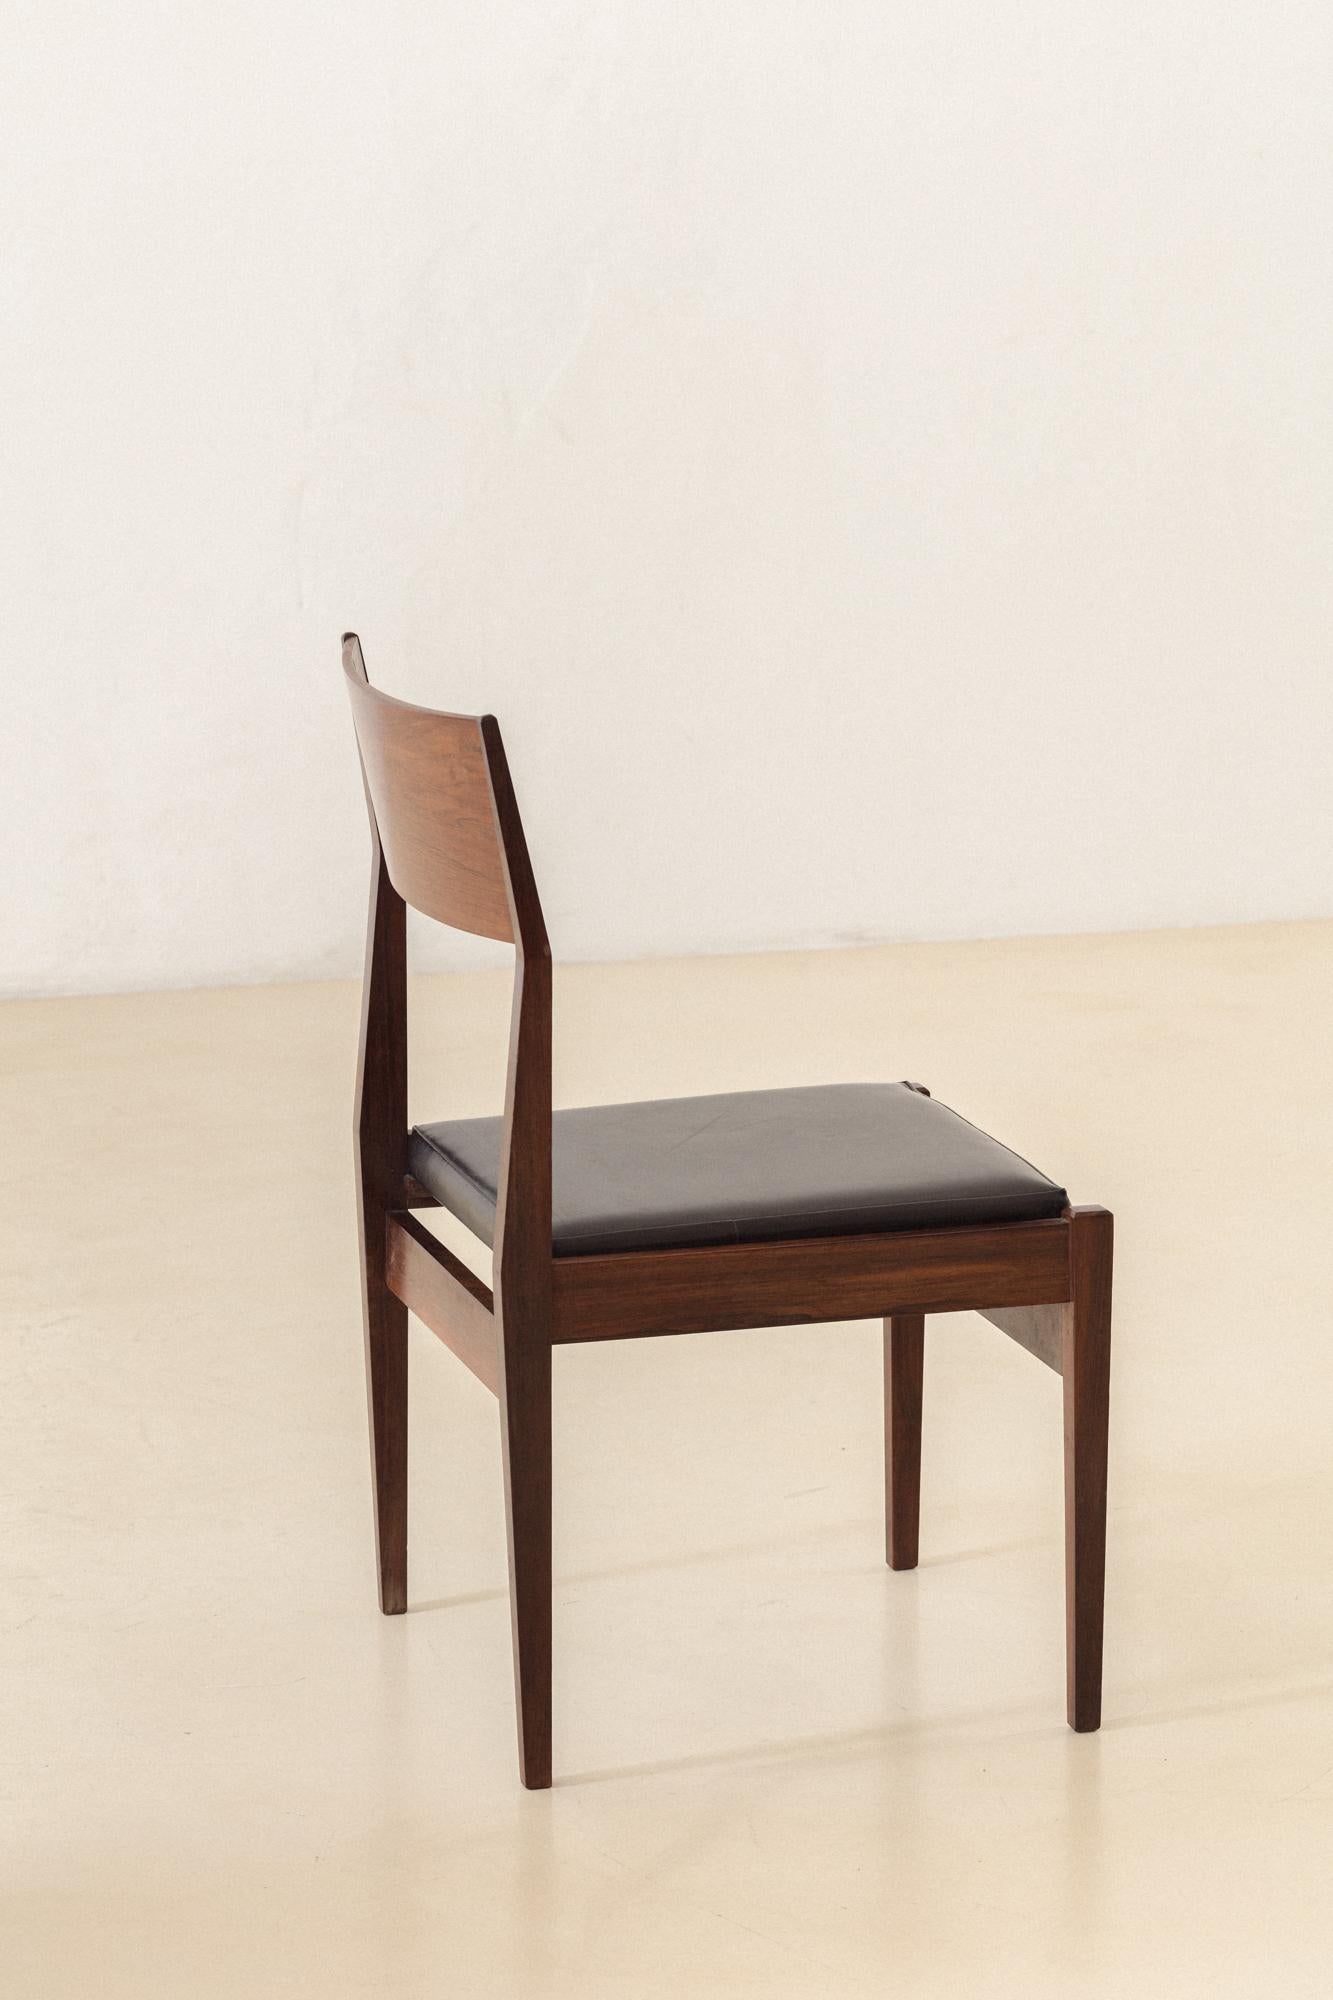 Iadê Rosewood Dining Chairs, Italo Bianchi, 1950s For Sale 2